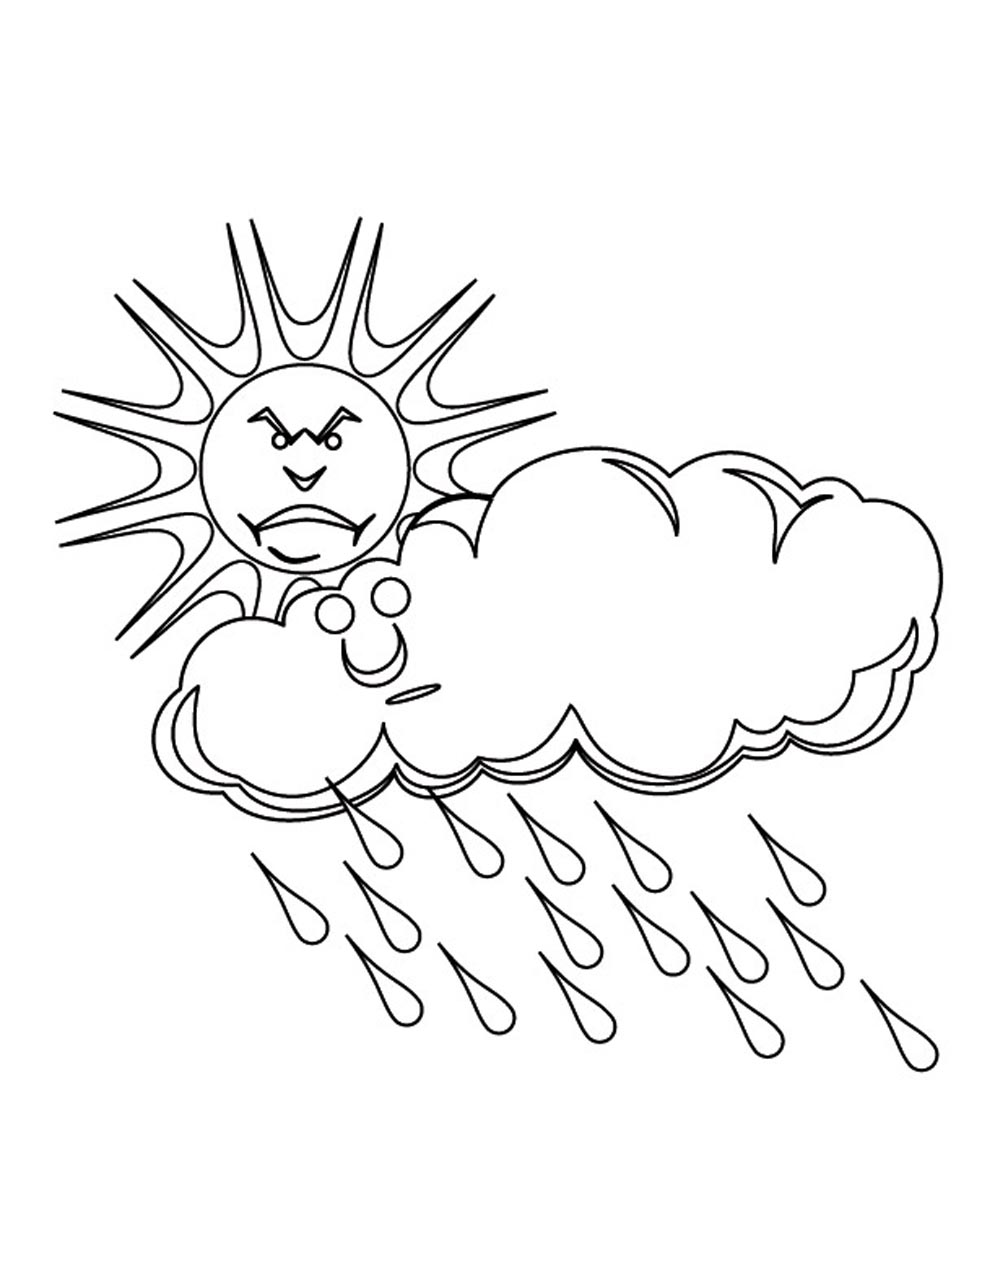 drawing-cloud-157393-nature-printable-coloring-pages